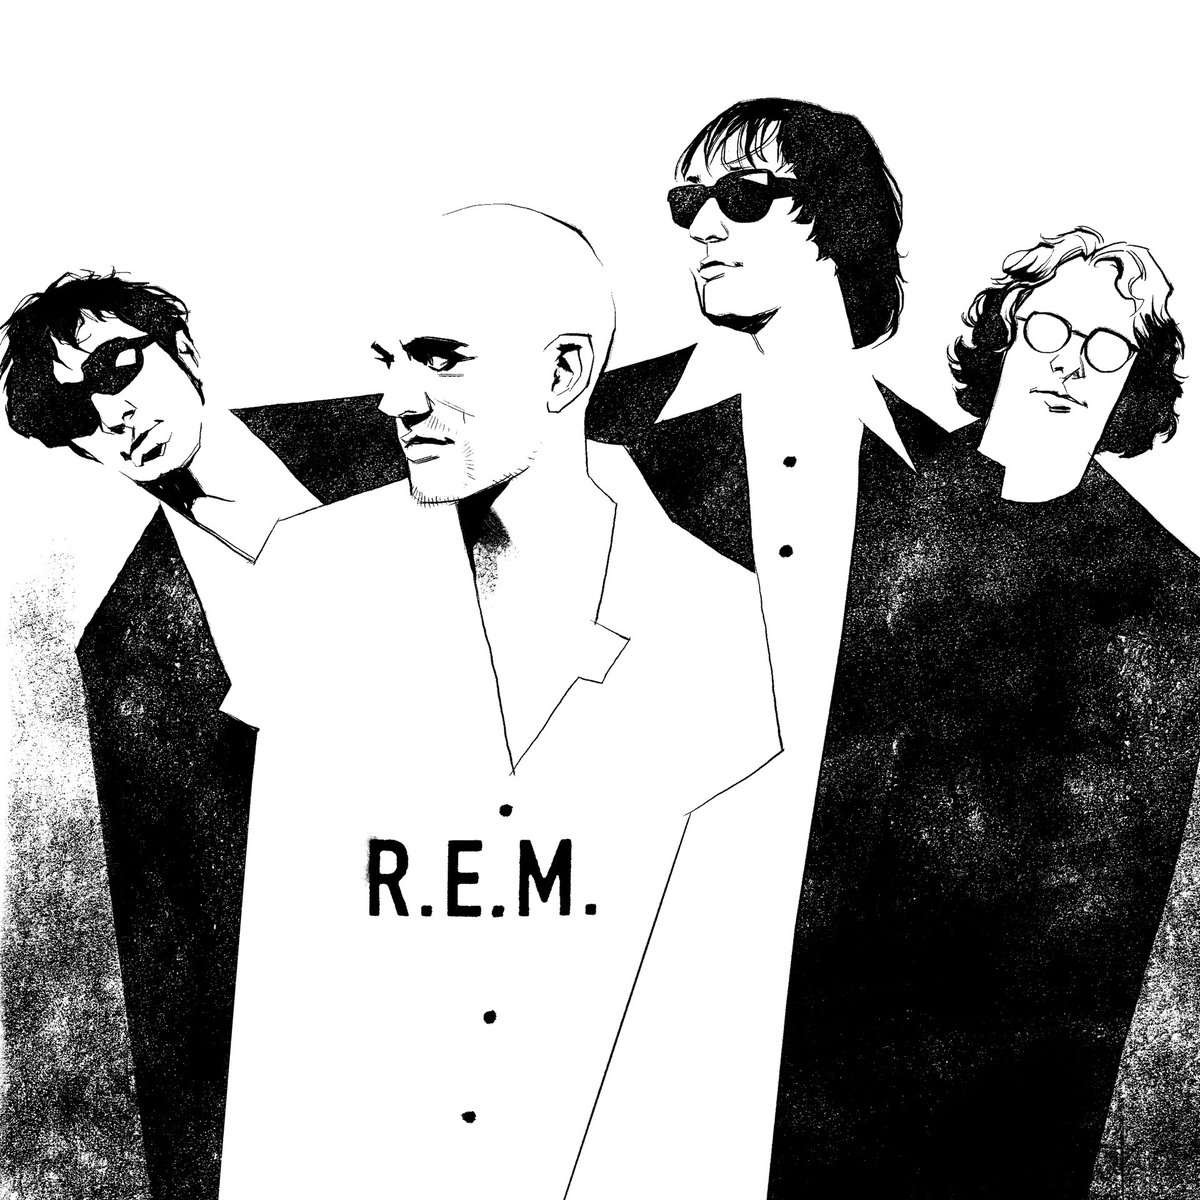 Inktober Day 17: R.E.M.
Favorite Songs: Nightswimming, Try Not to Breathe, What's the Frequency, Kenneth? Half a World Away

#inktober #inktober2019 @remhq #illustration #art #music 